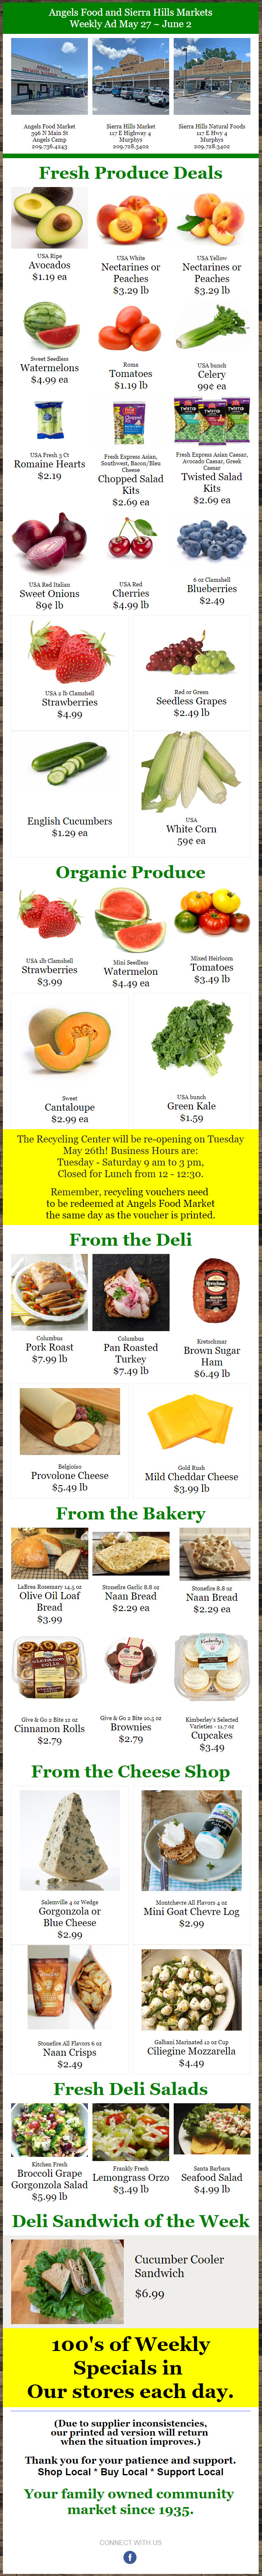 Angels Food and Sierra Hills Markets Weekly Ad & Specials Through June 2nd